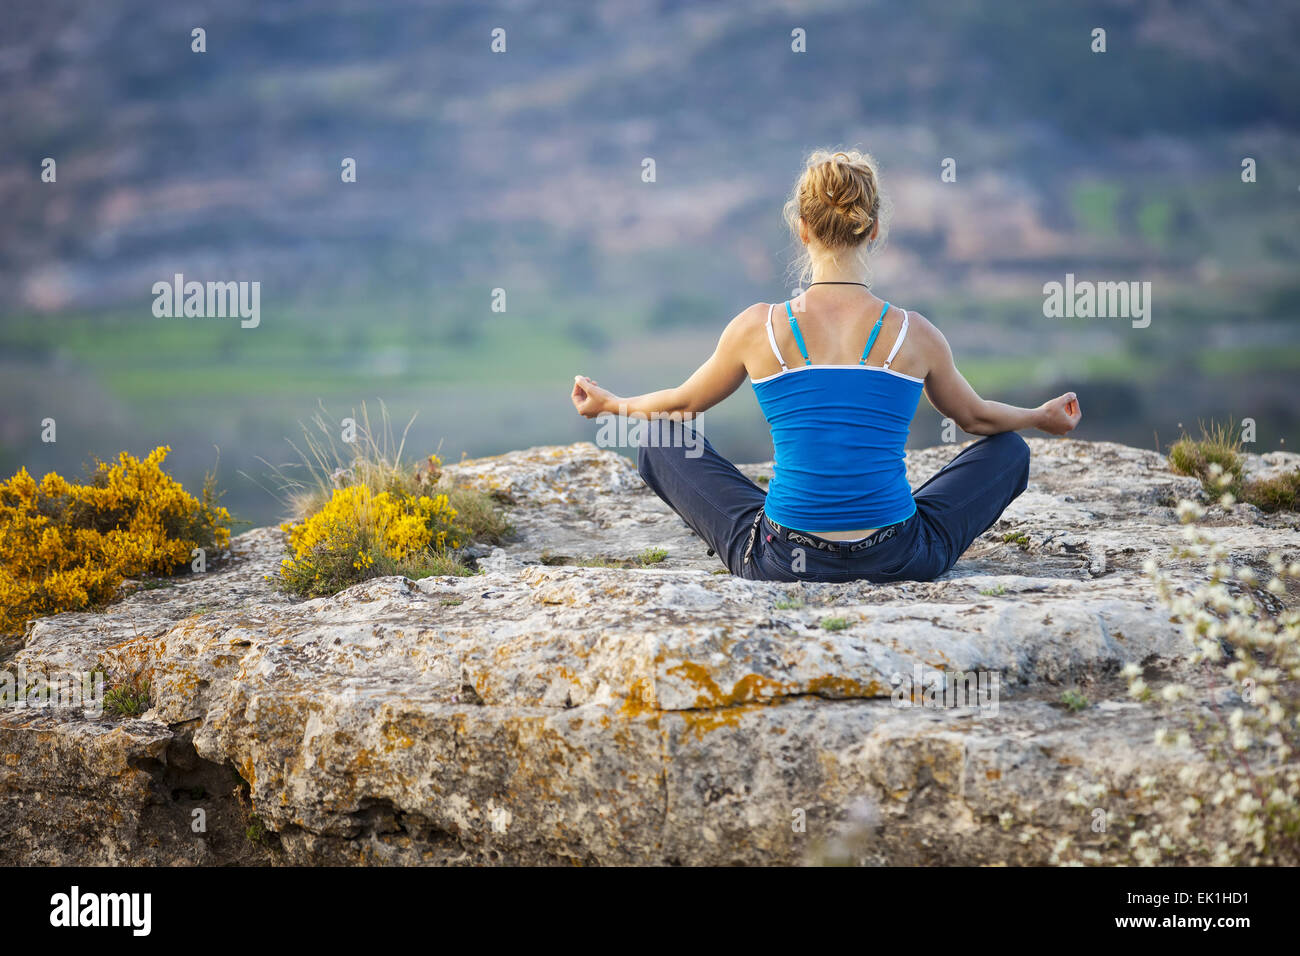 Young woman sitting on a rock in asana position Stock Photo